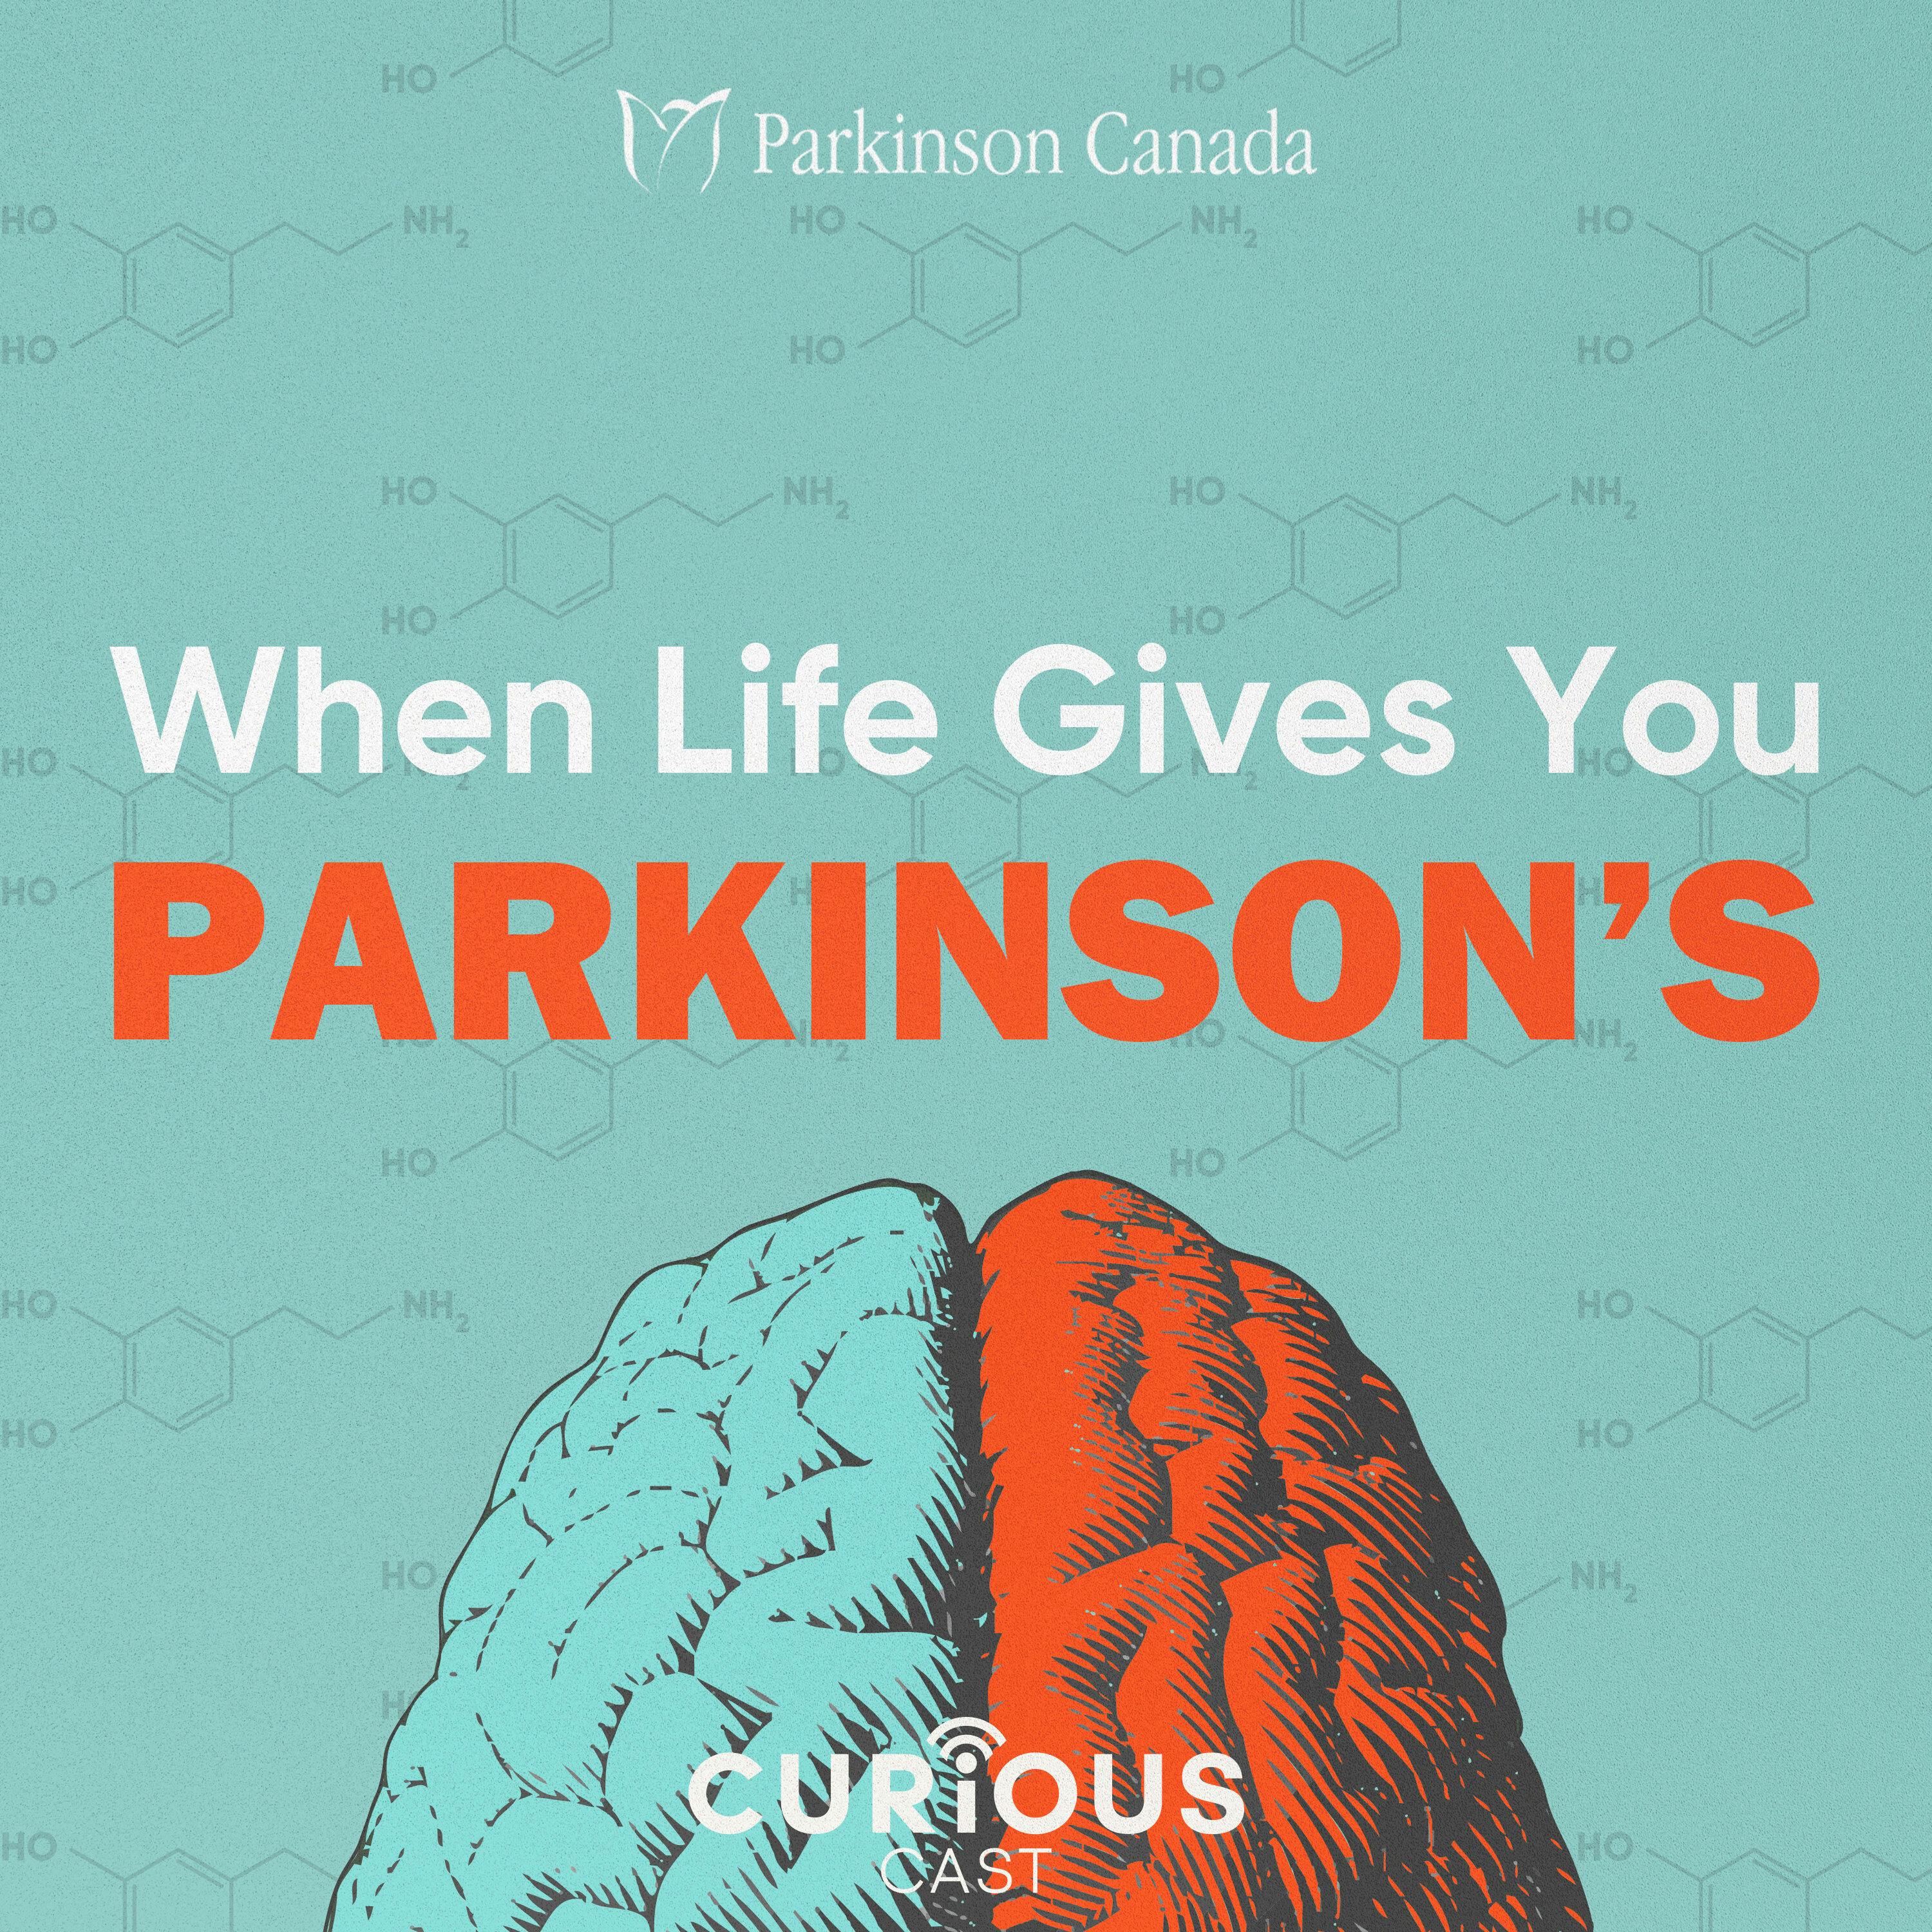 The Smell of Parkinson’s | 4